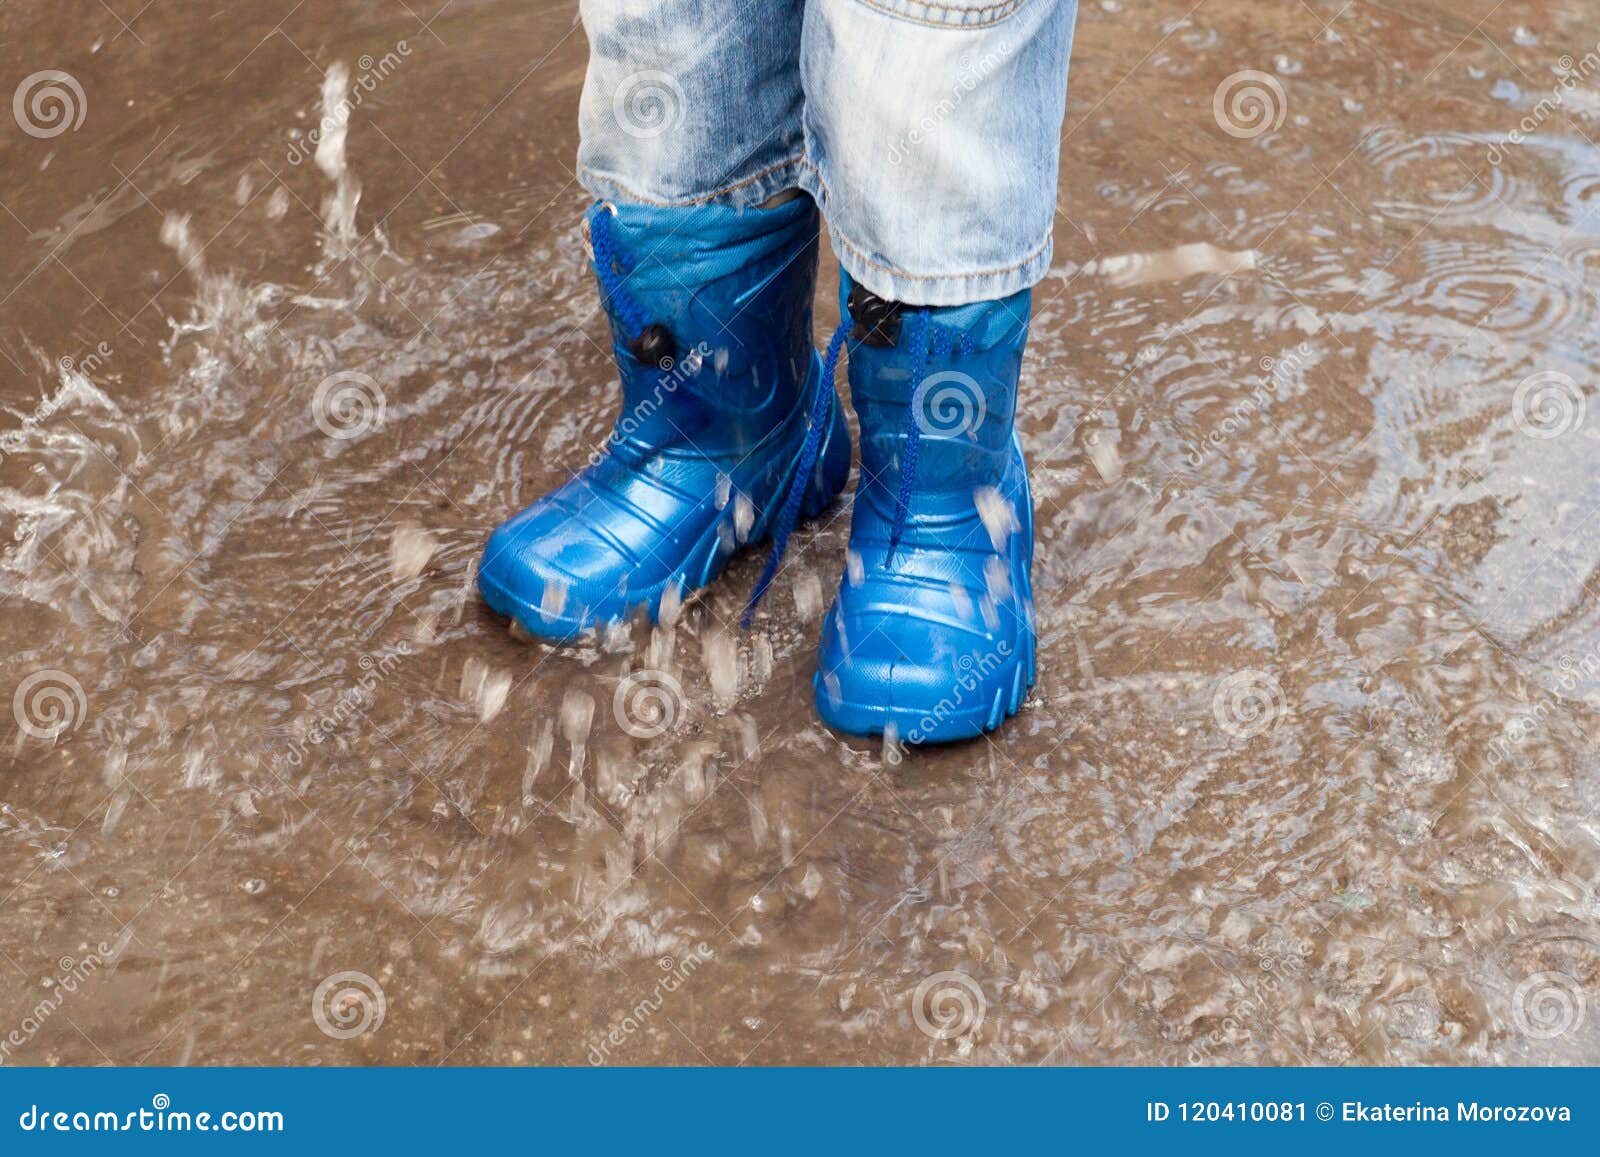 Child with Rain Boots Jumps into a Puddle. Stock Image - Image of ...